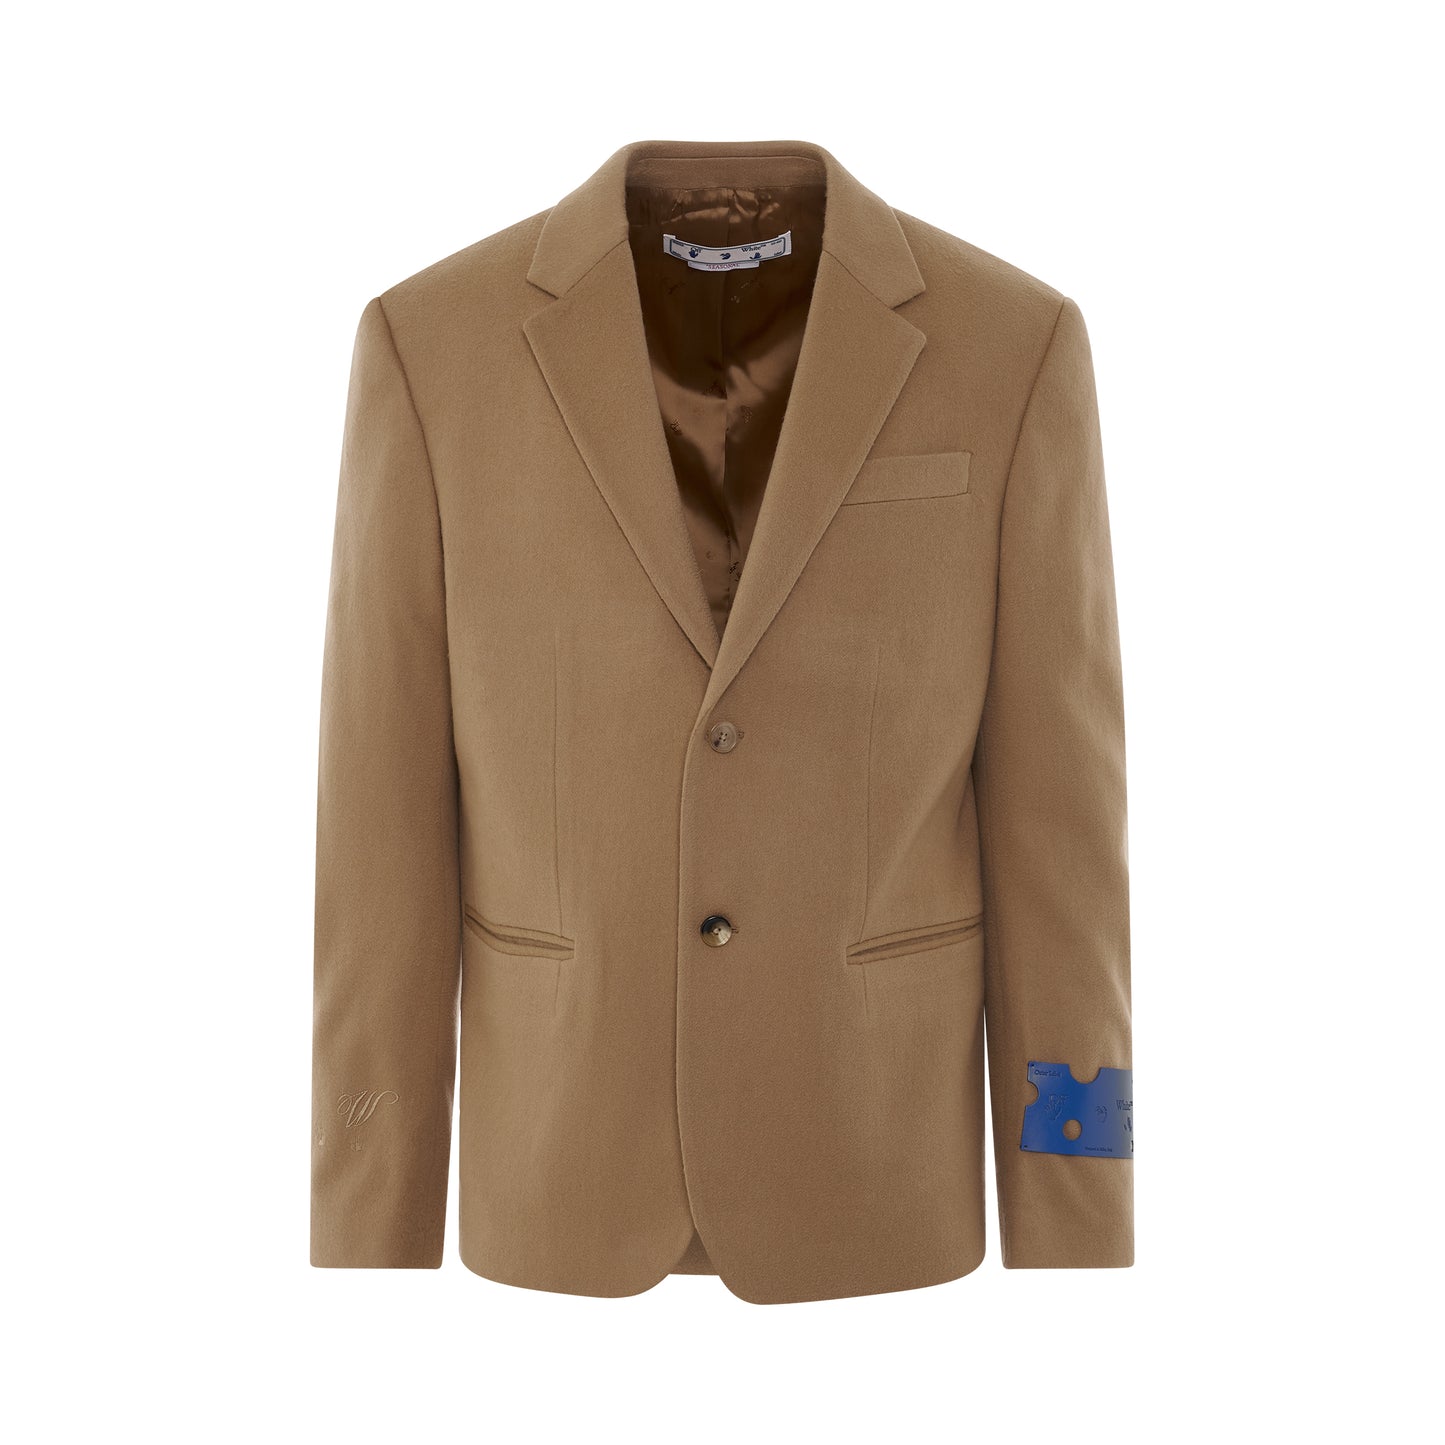 Tags Cashmere Relax Jacket in Camel